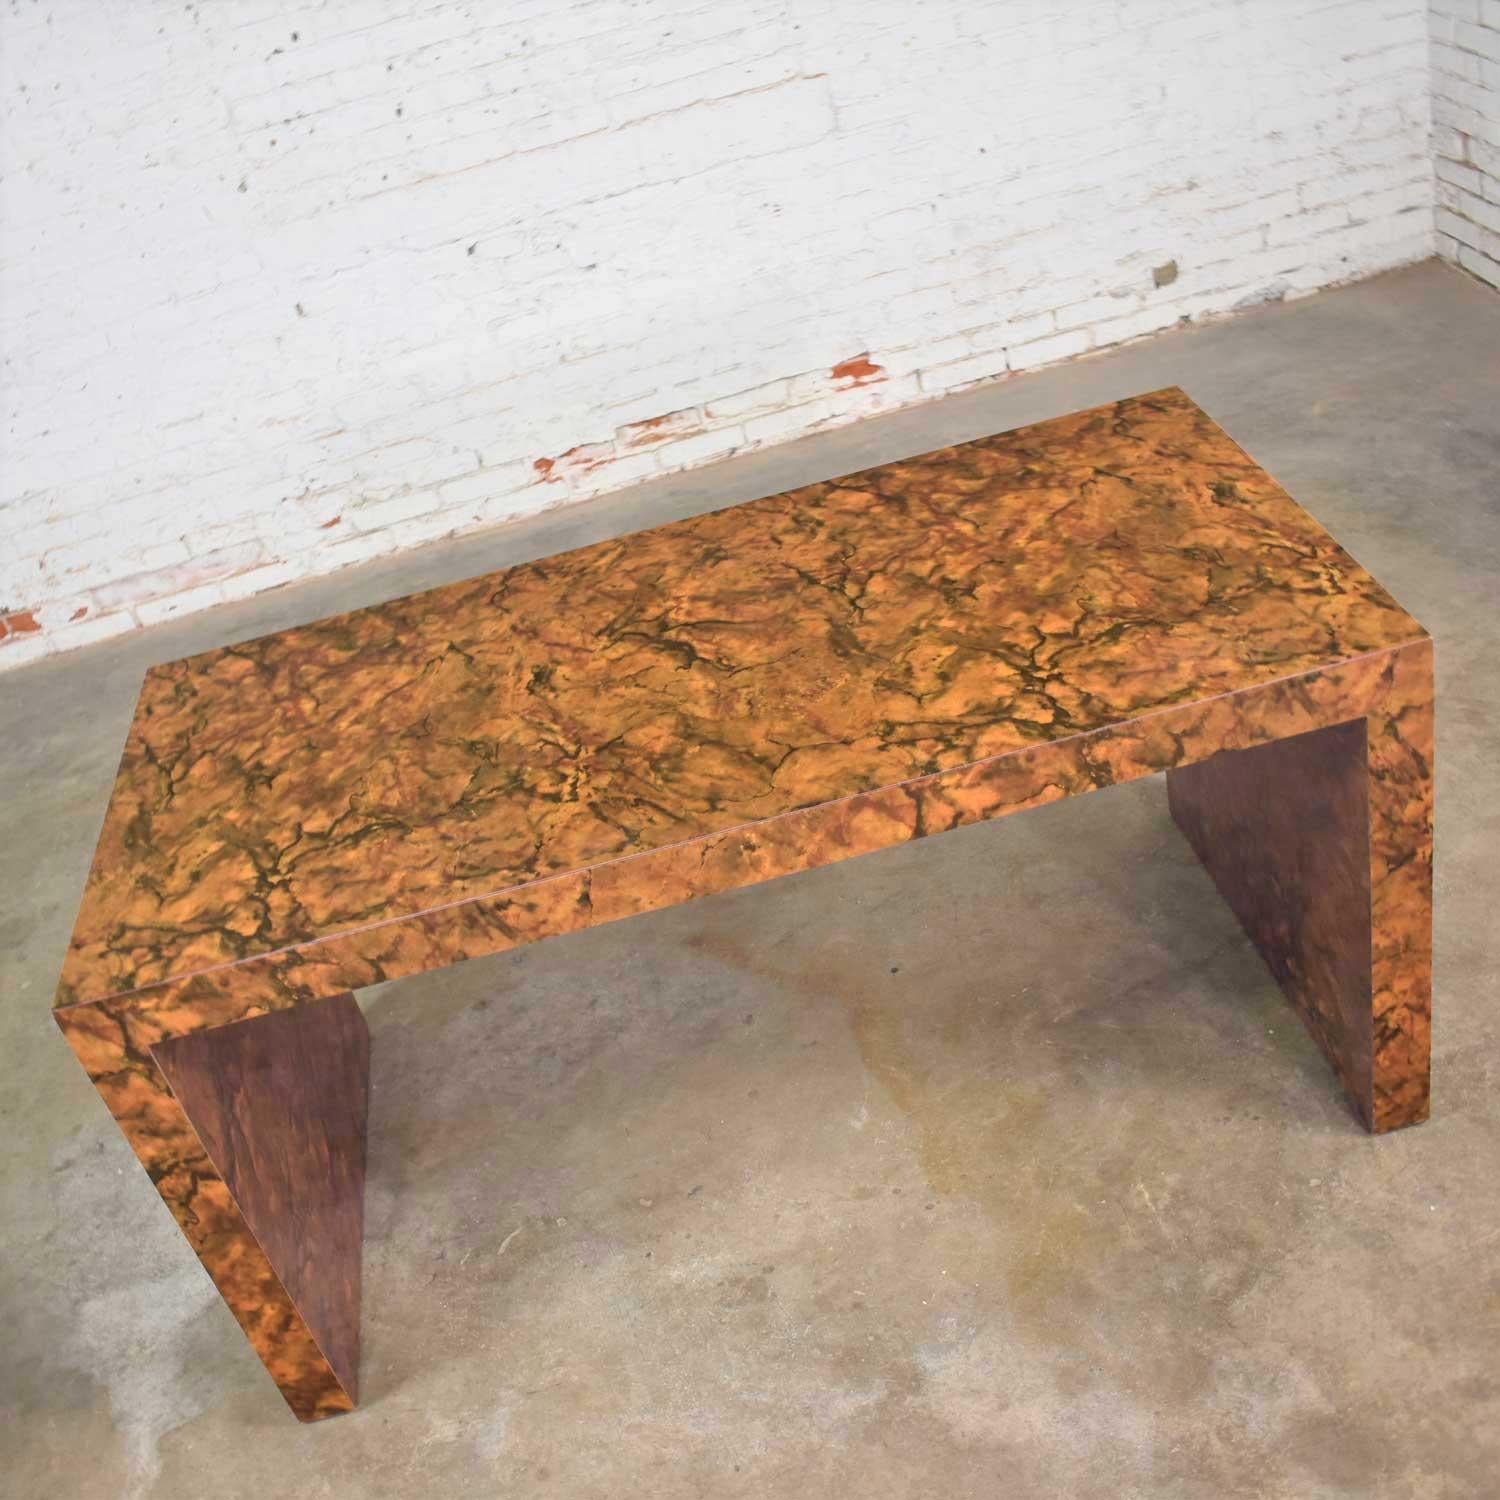 Handsome modern table, console table, or desk in a waterfall parsons styling covered in a faux tortoise shell laminate and made in the design style of Karl Springer. It is in wonderful vintage condition. It does have a small repair to the laminate